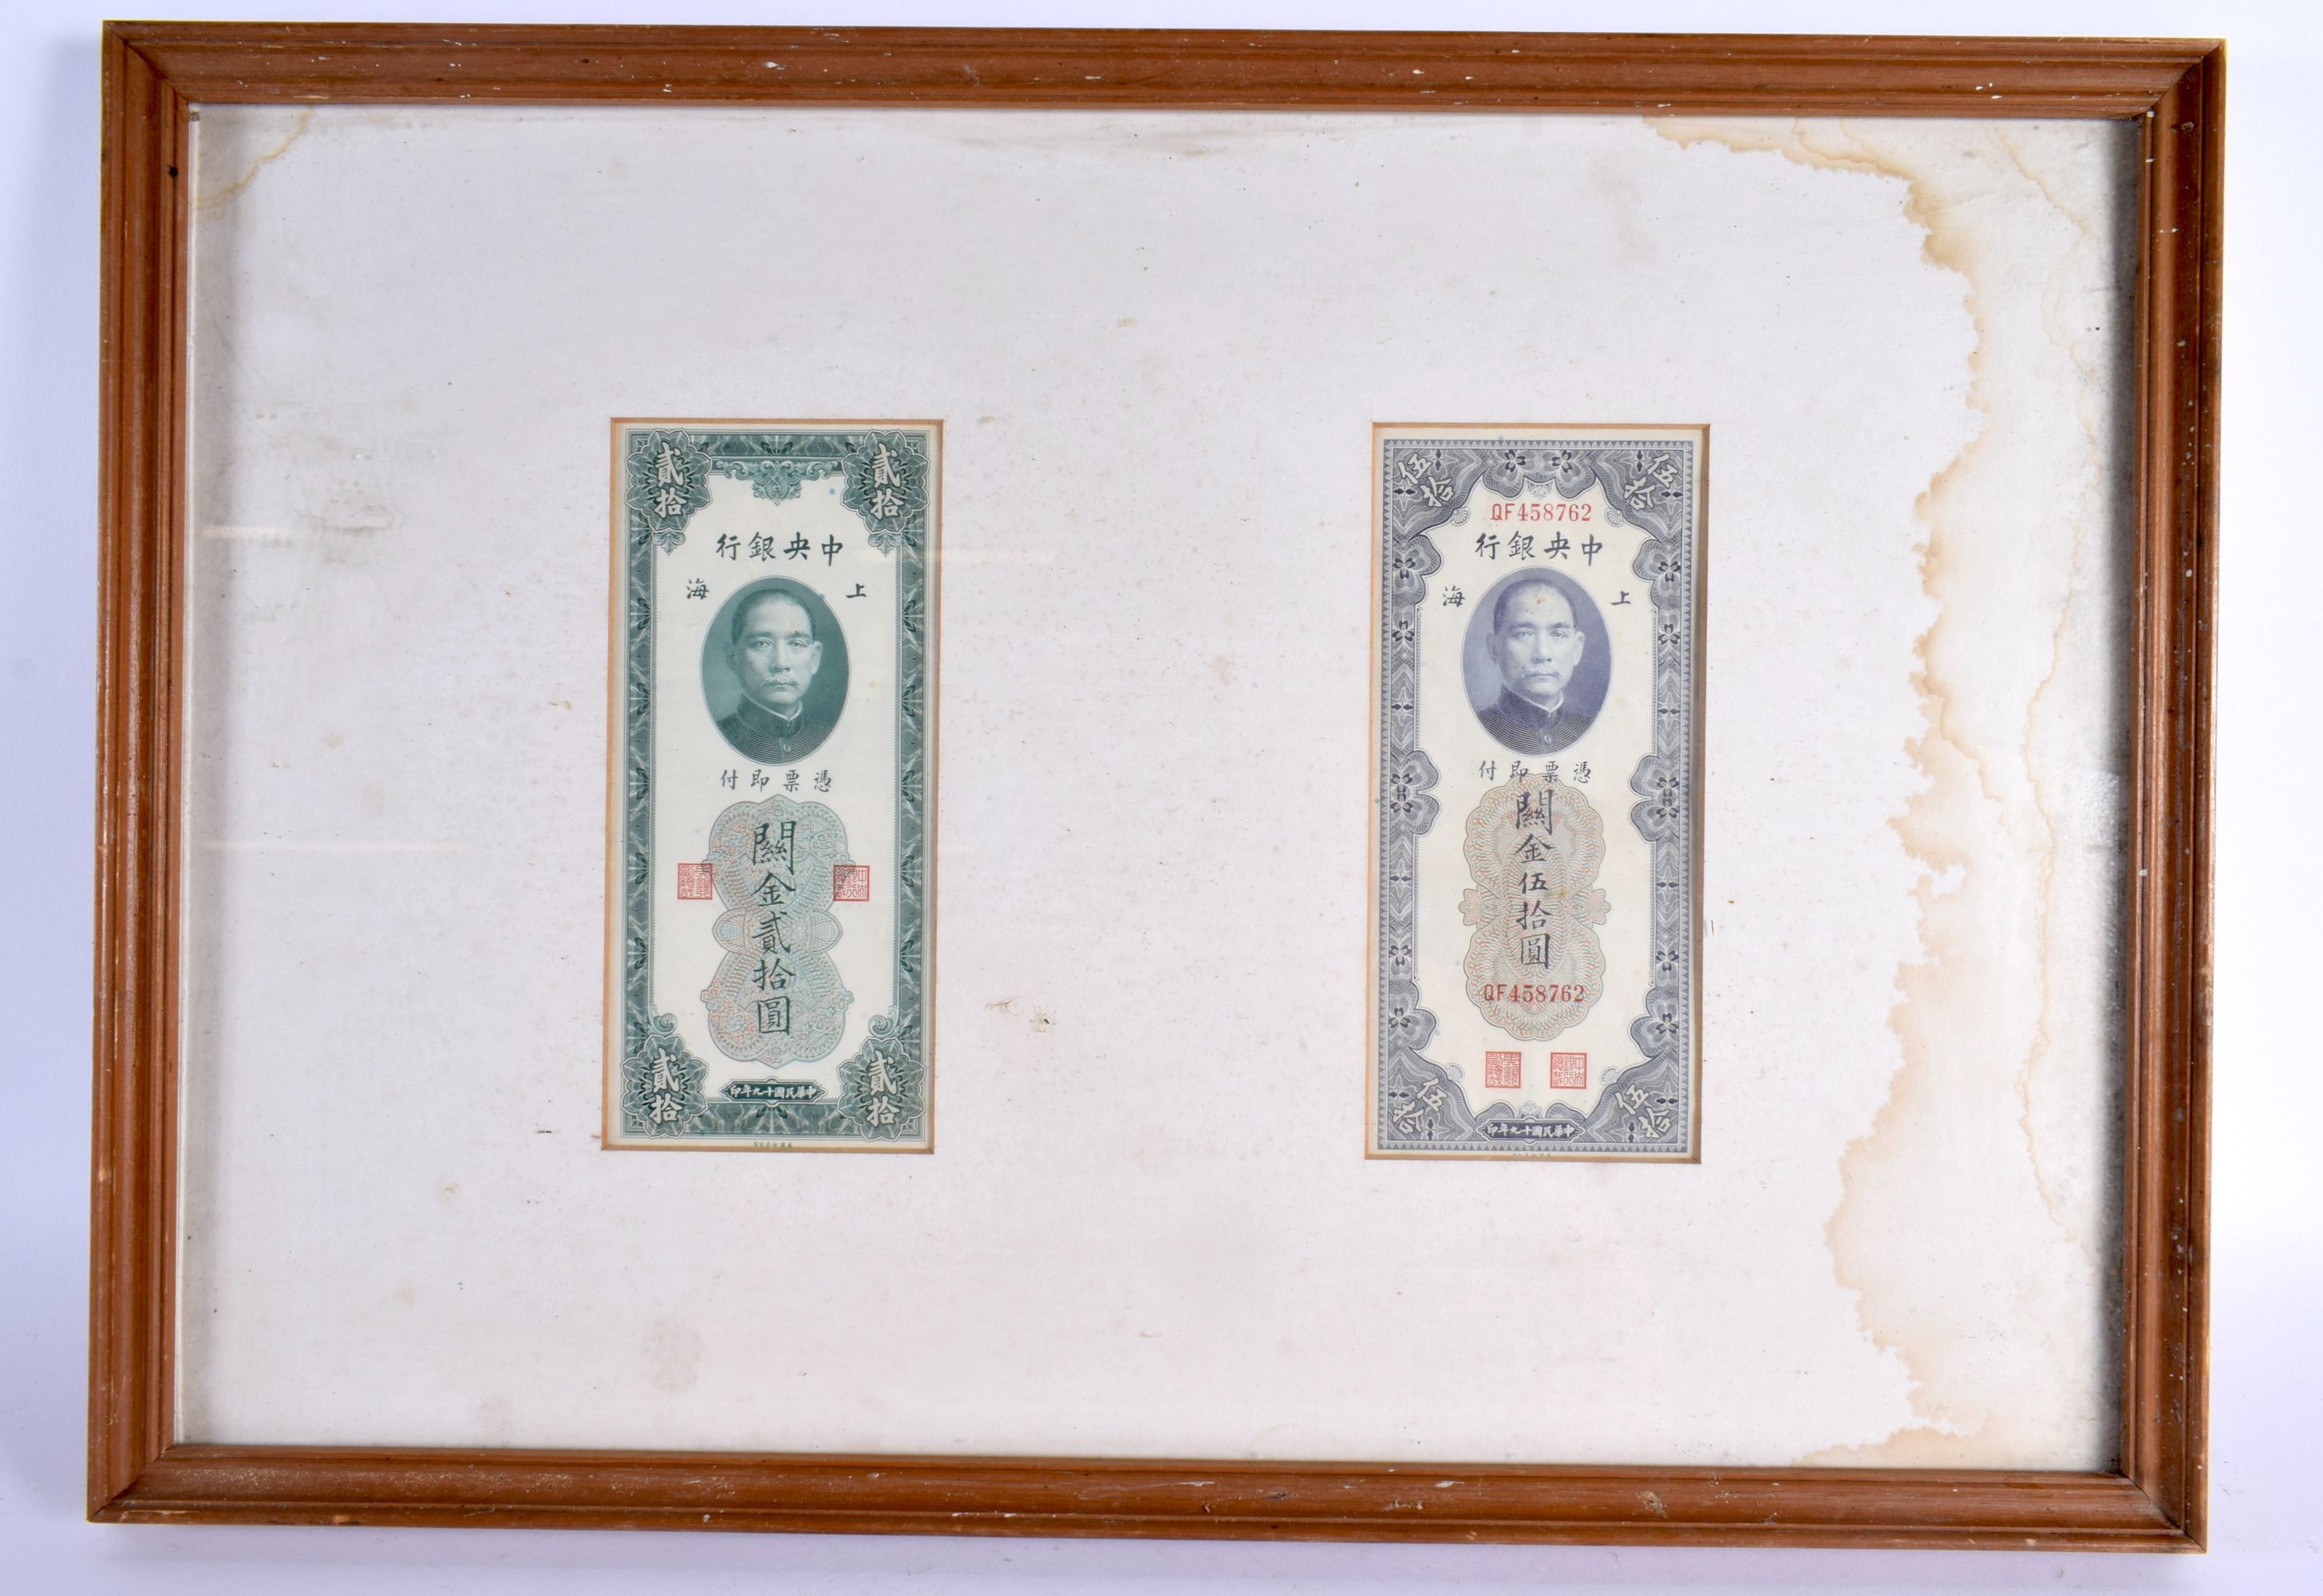 FRAMED CHINESE BANK NOTE CURRENCY. 54 cm x 36 cm.